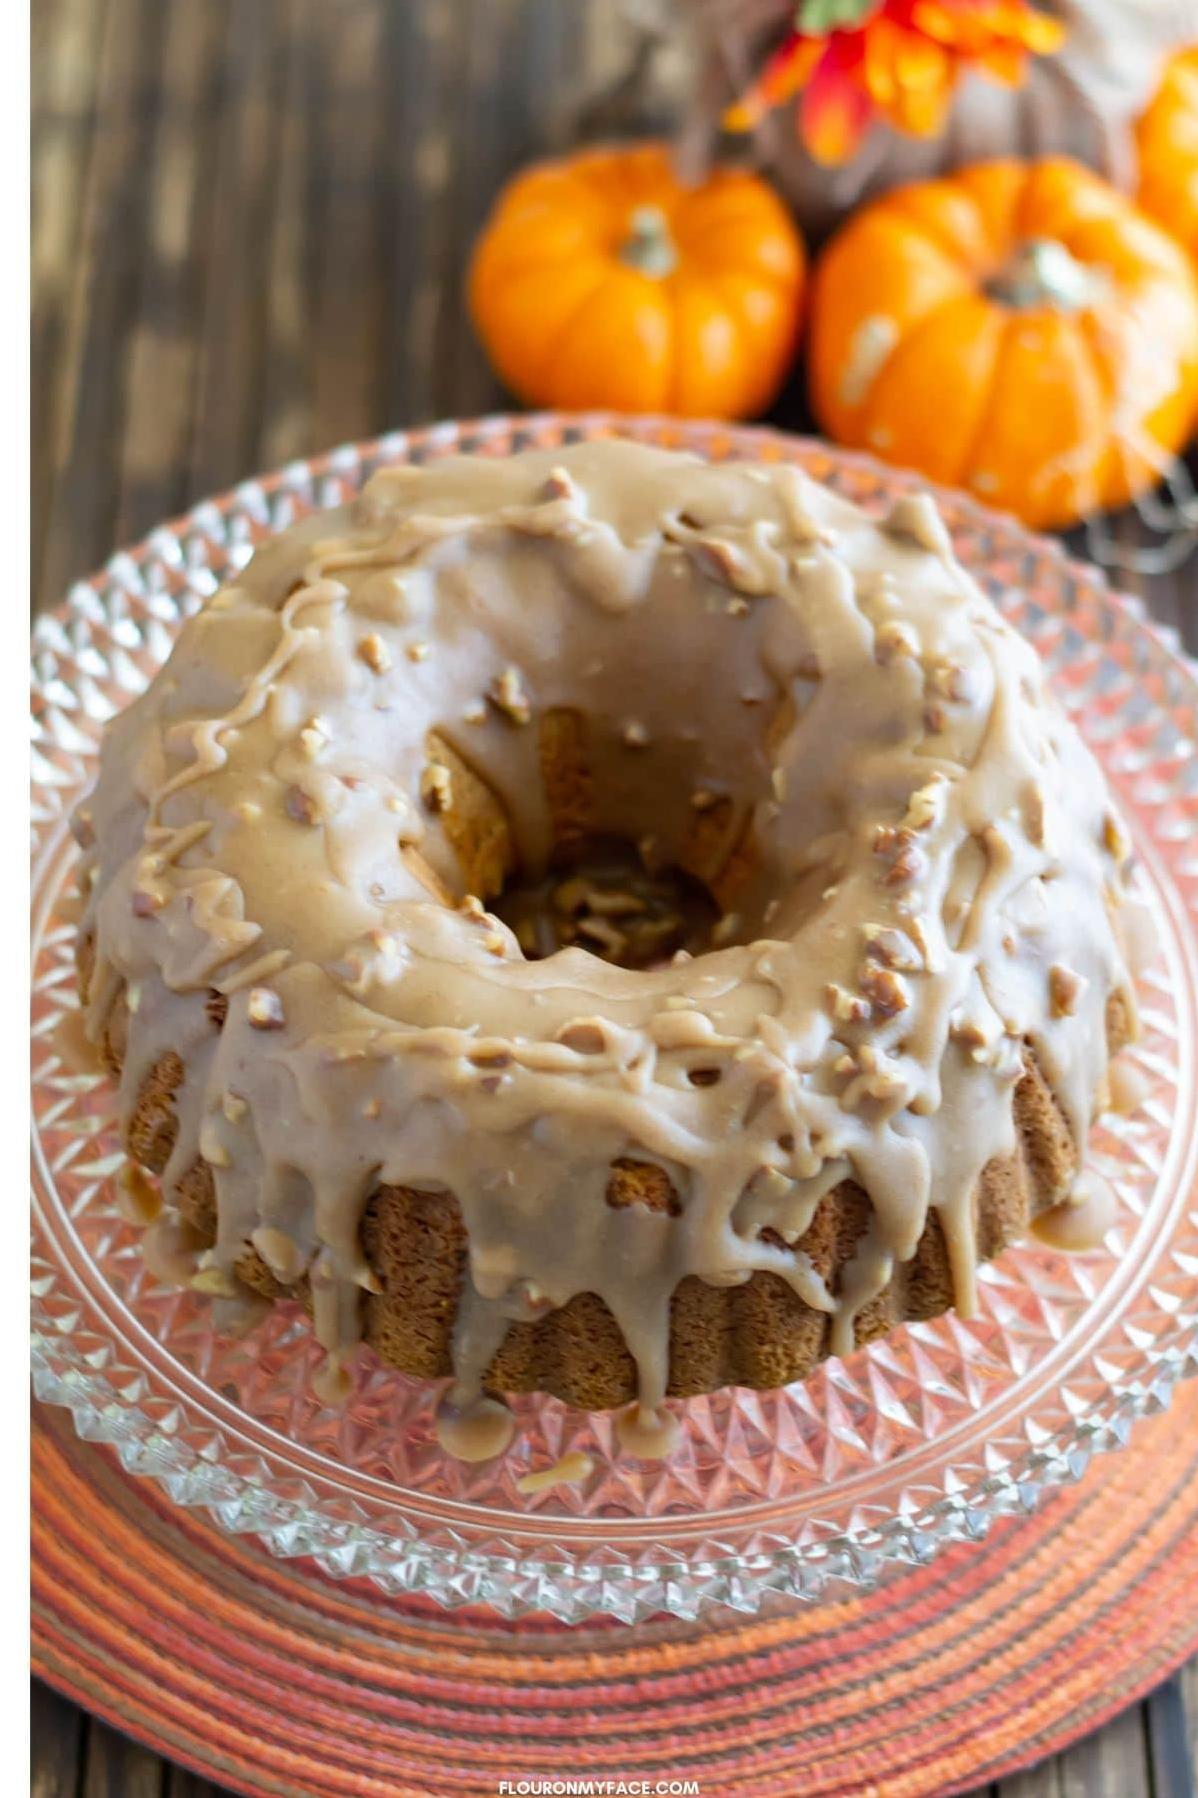  A delightful blend of warm spices and nutty pecans will fill your home with the essence of fall.